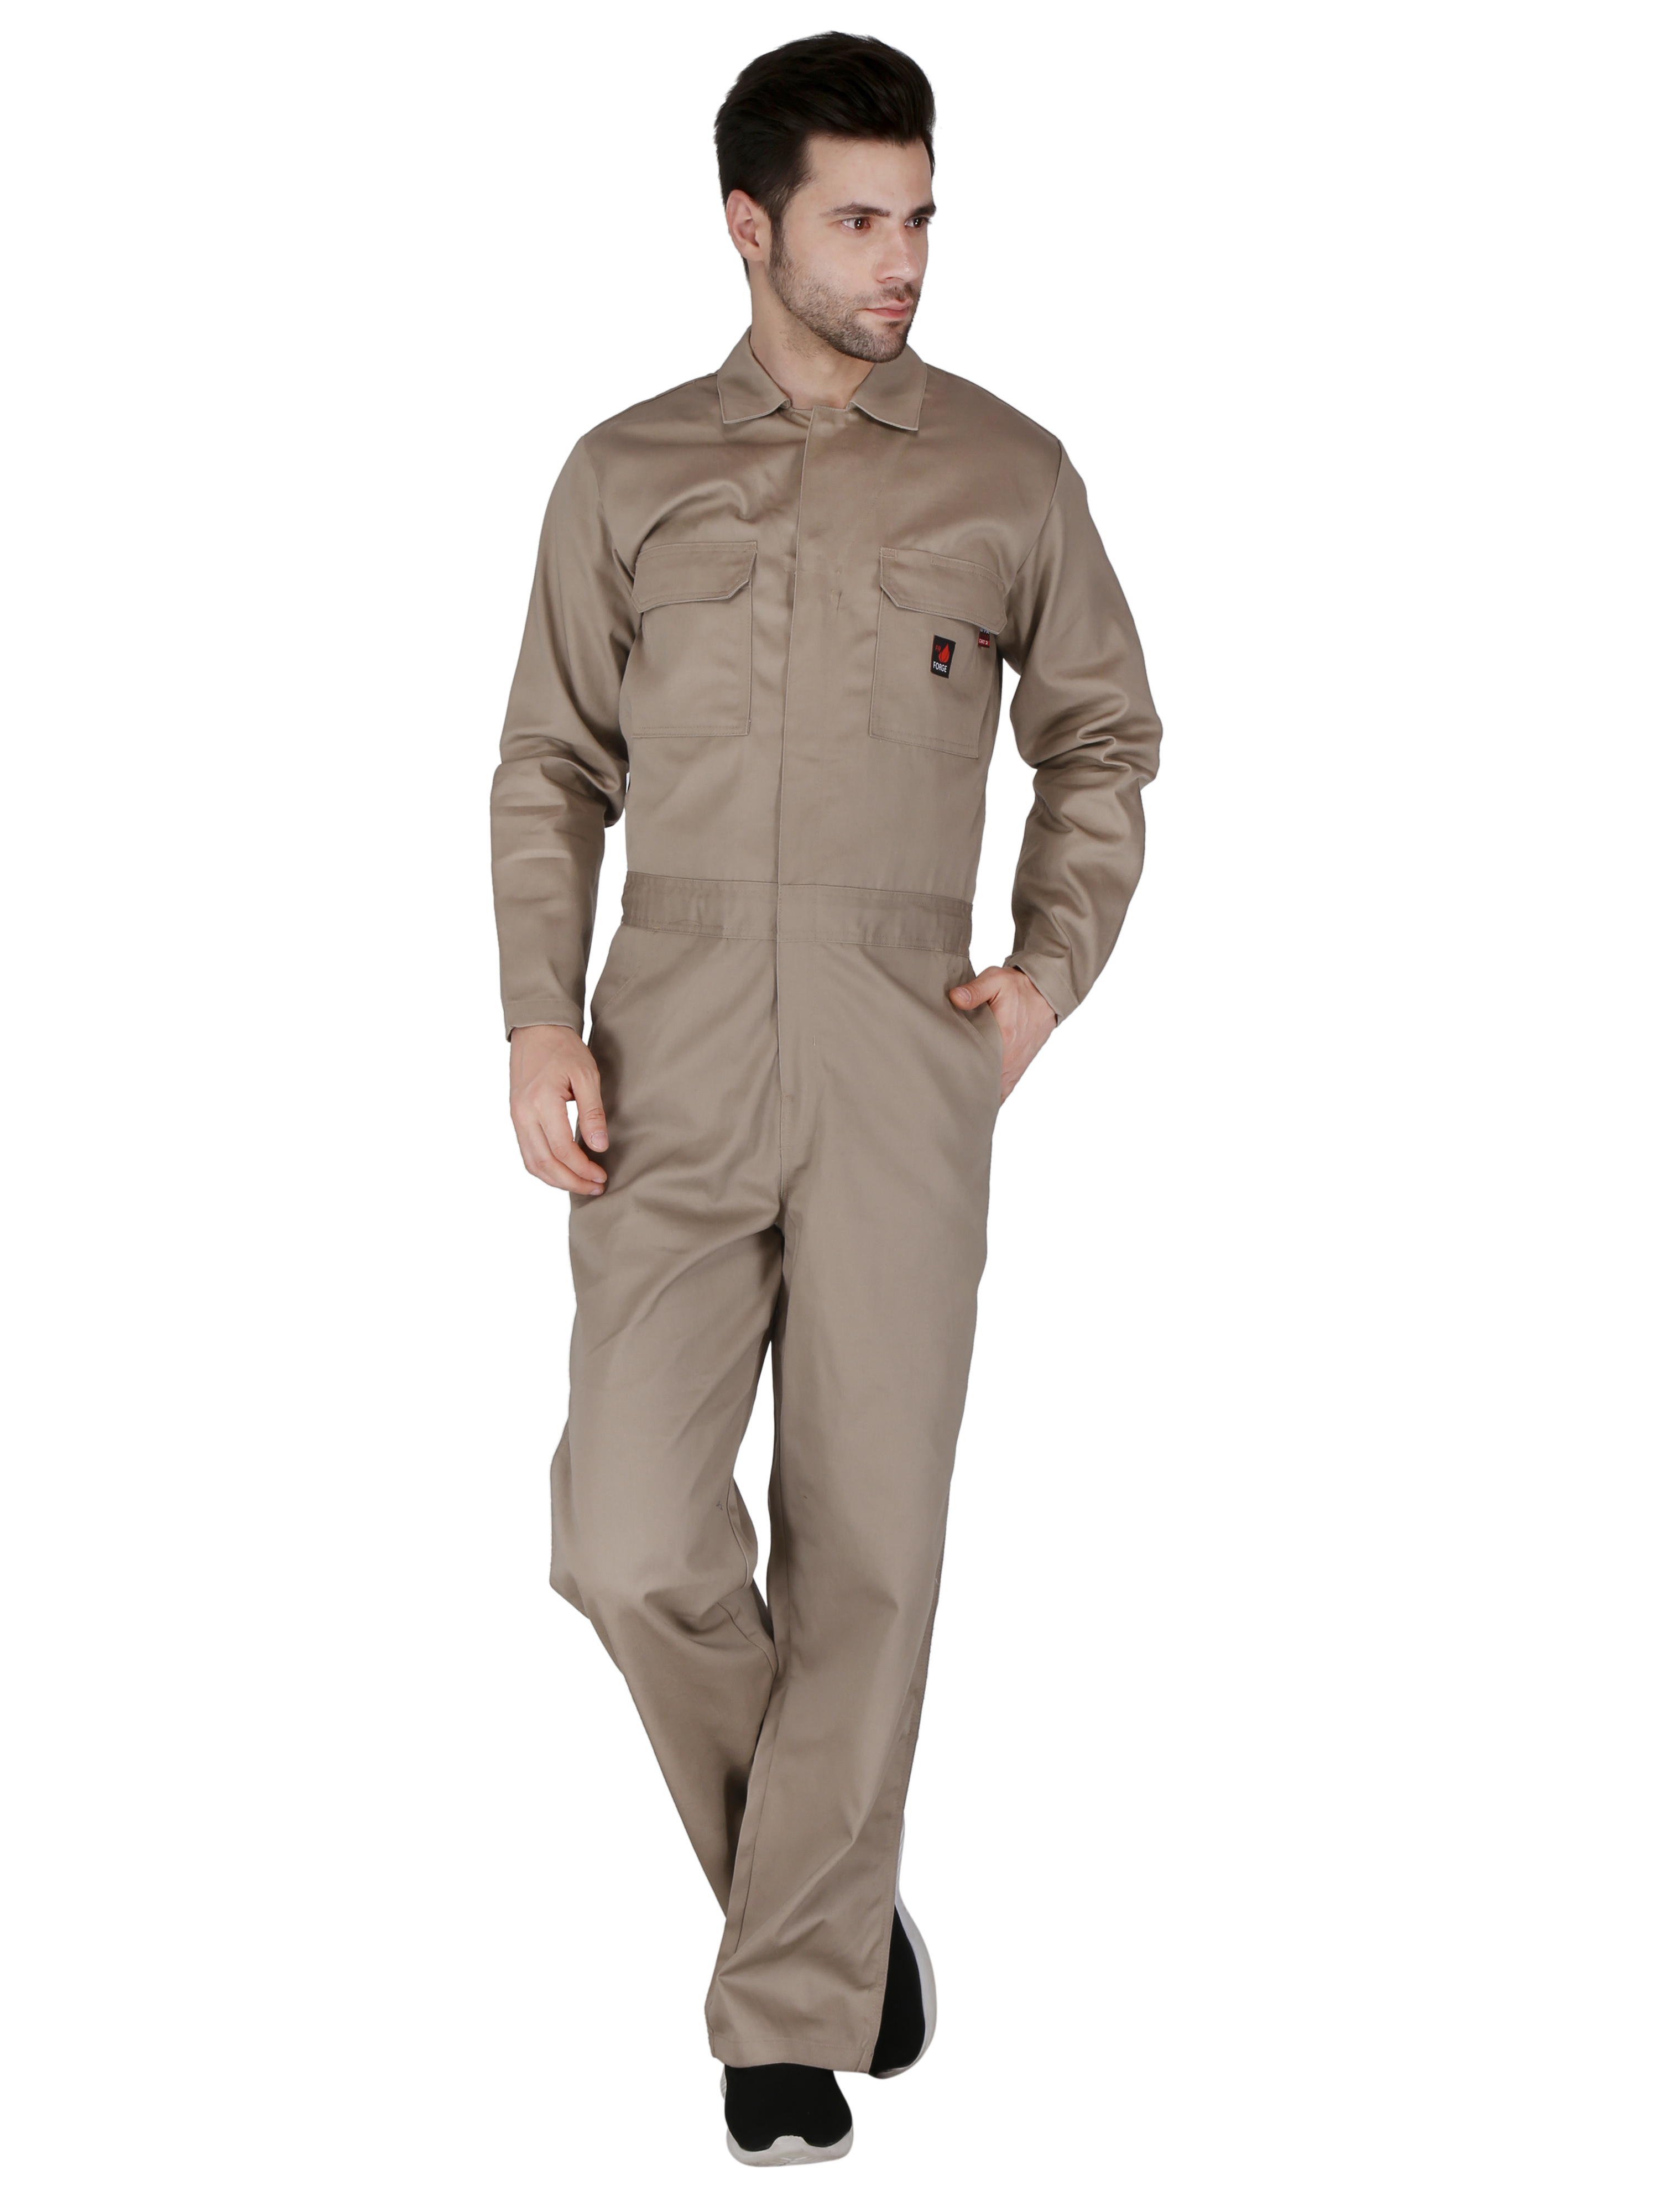 Picture of Forge FR MFRCVRL-0014 MEN'S FR COVERALL